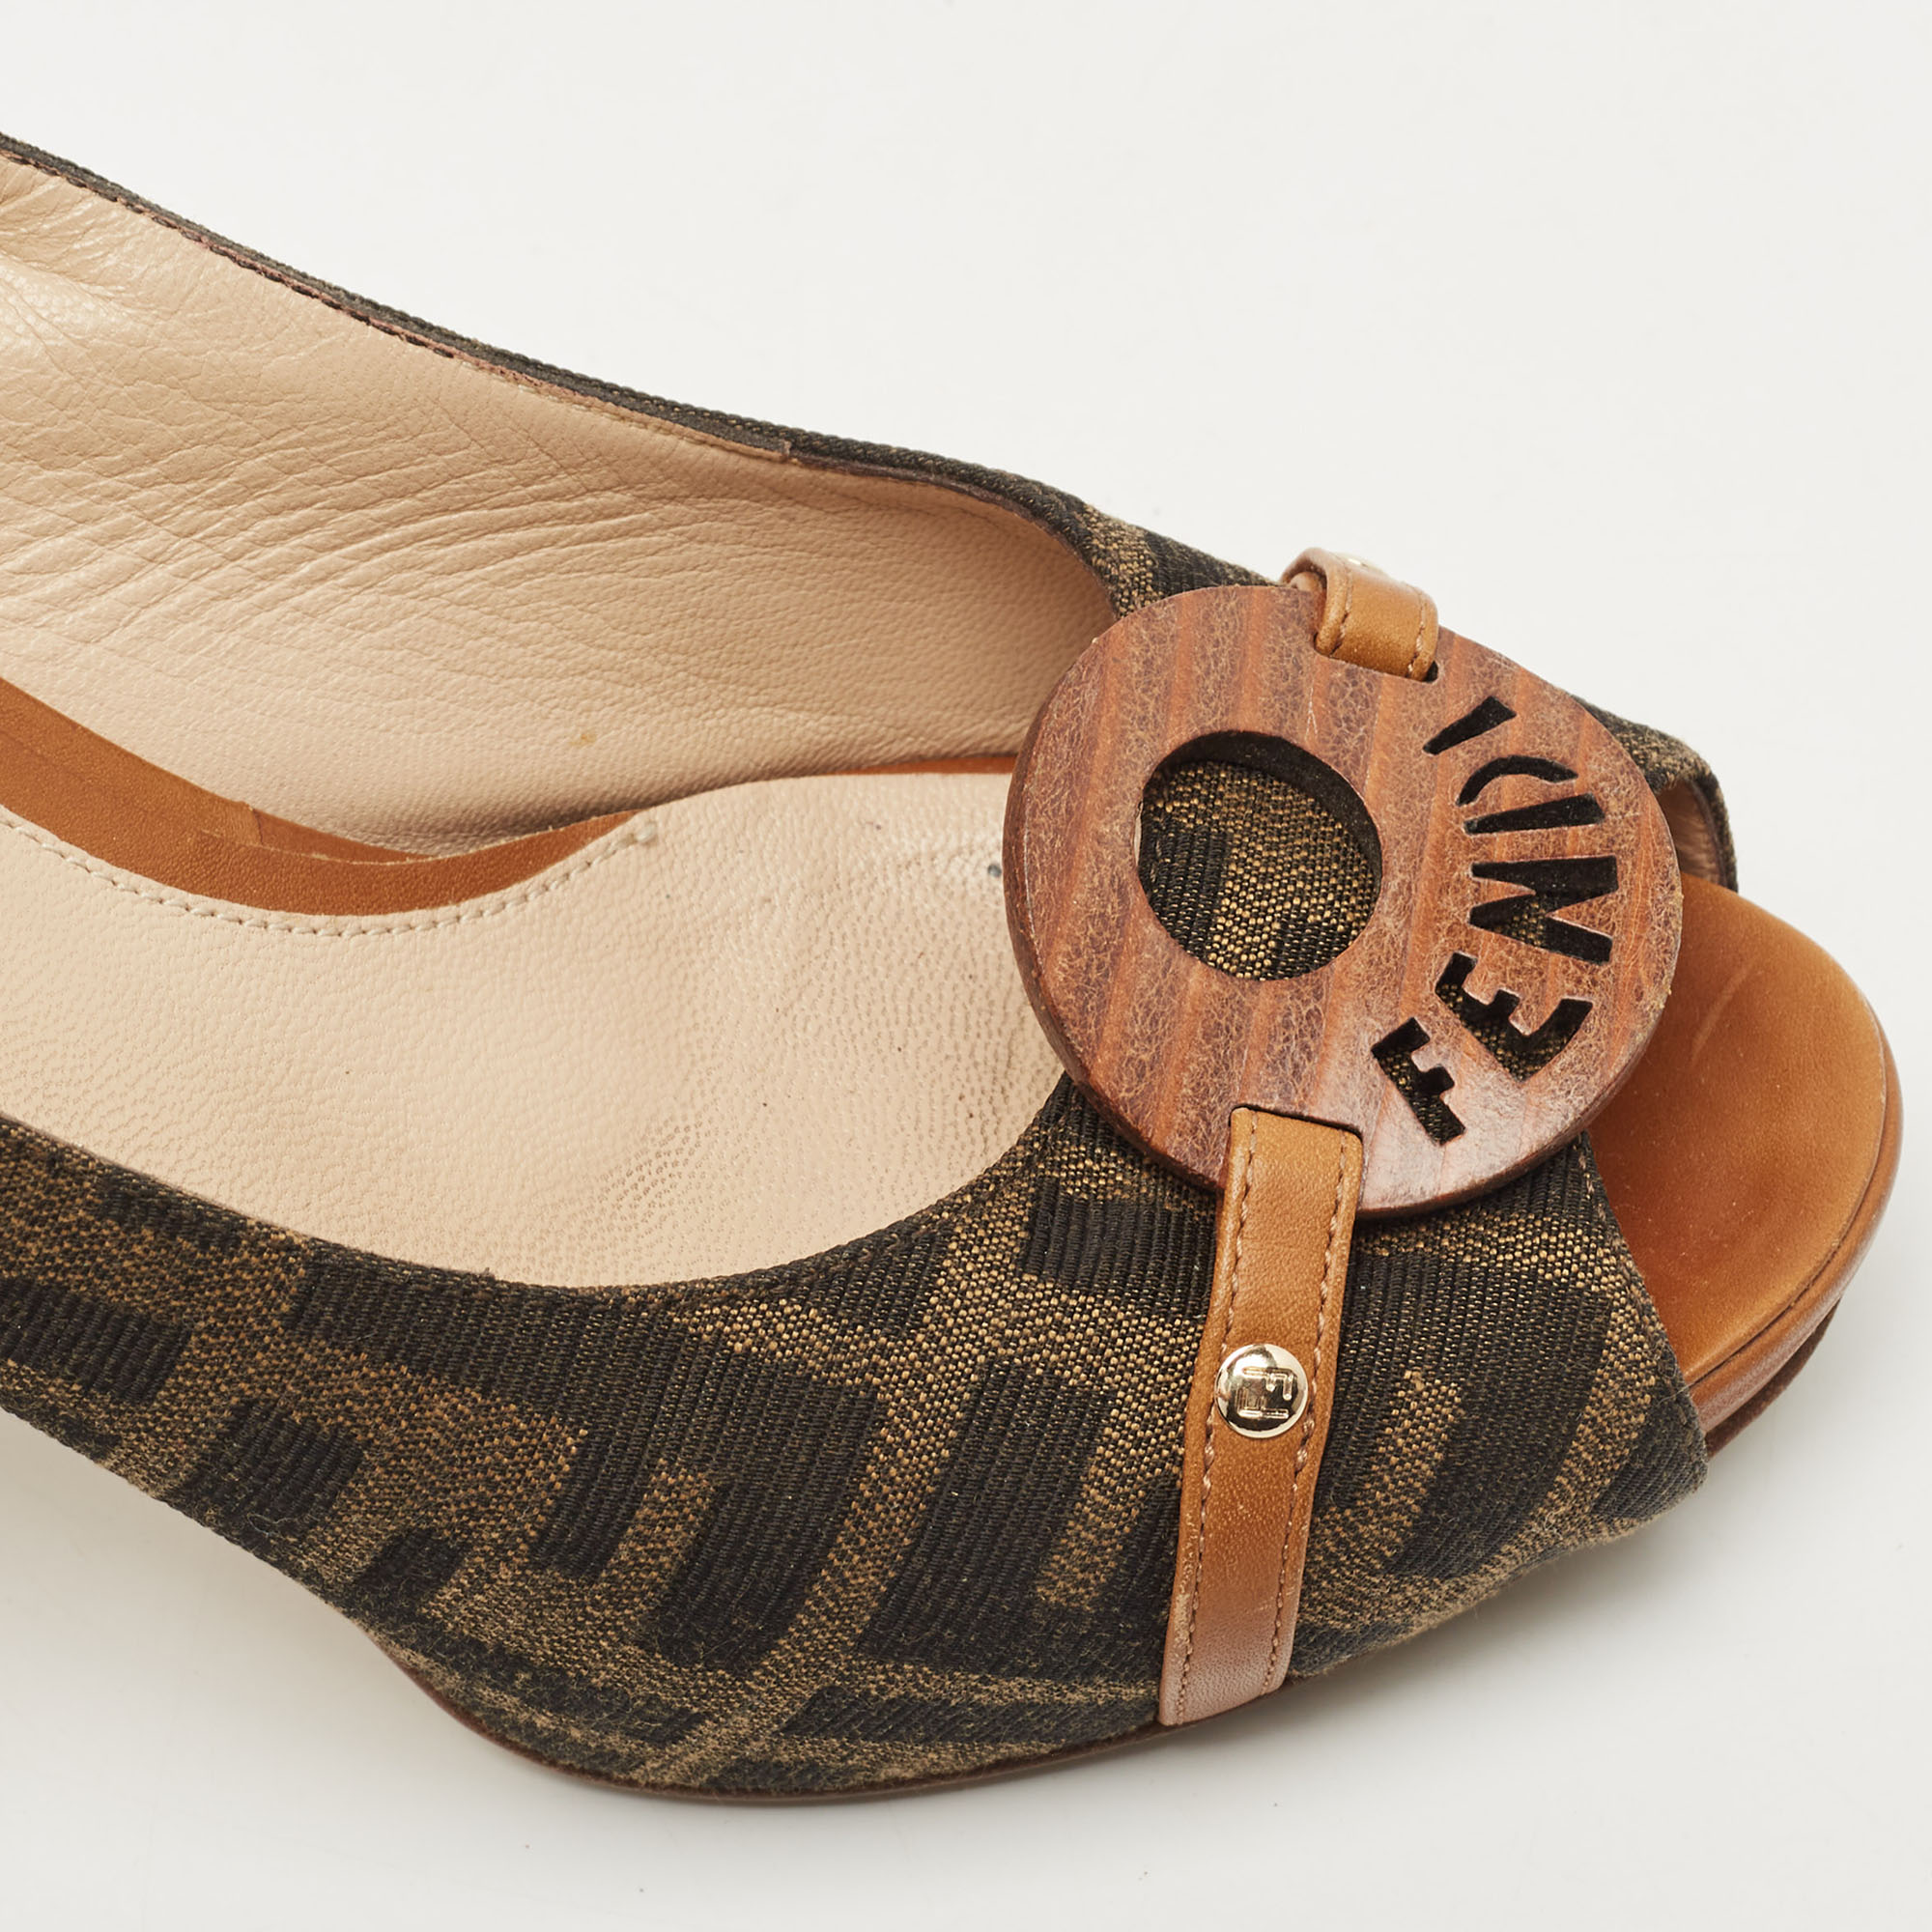 Fendi Brown Zucca Canvas And Leather Slingback Pumps Size 35.5